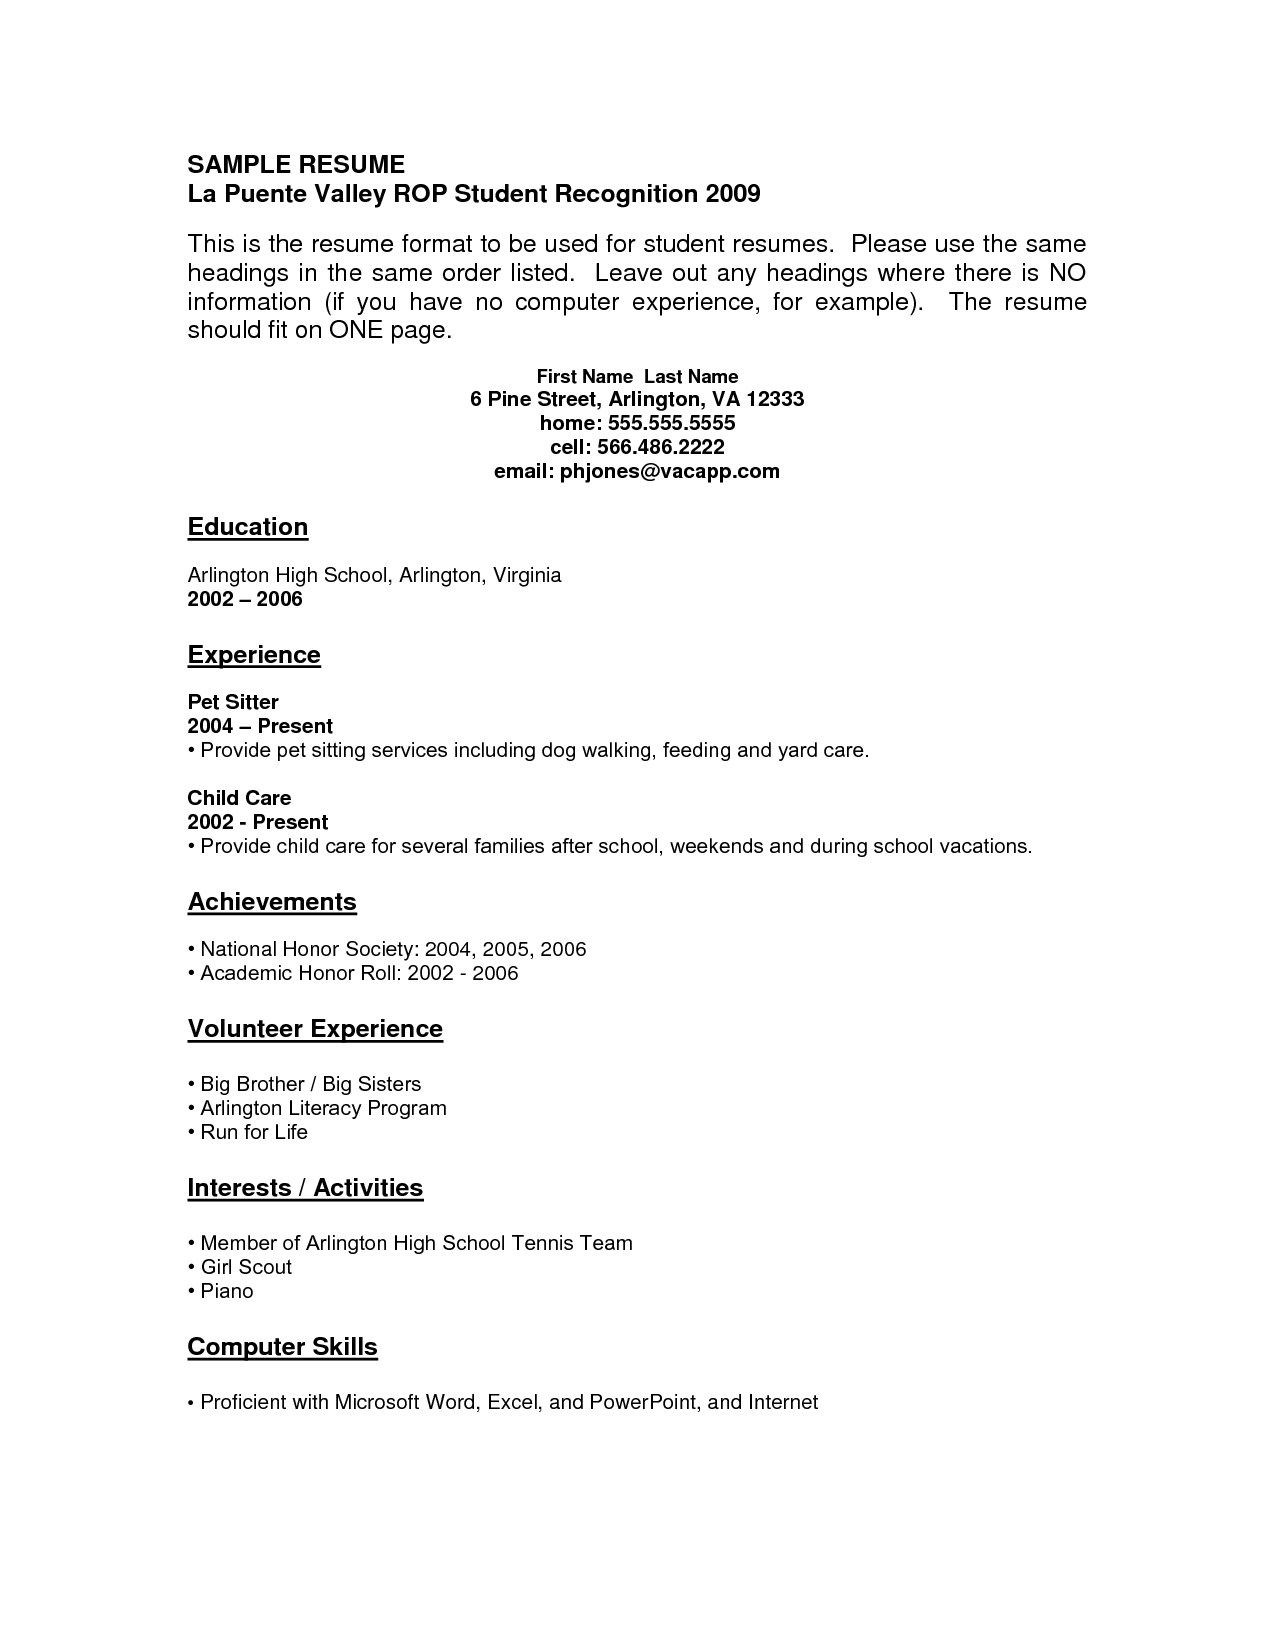 Sample Resume for High School Graduate without Experience Resume Examples with No Job Experience – Resume Templates Resume …